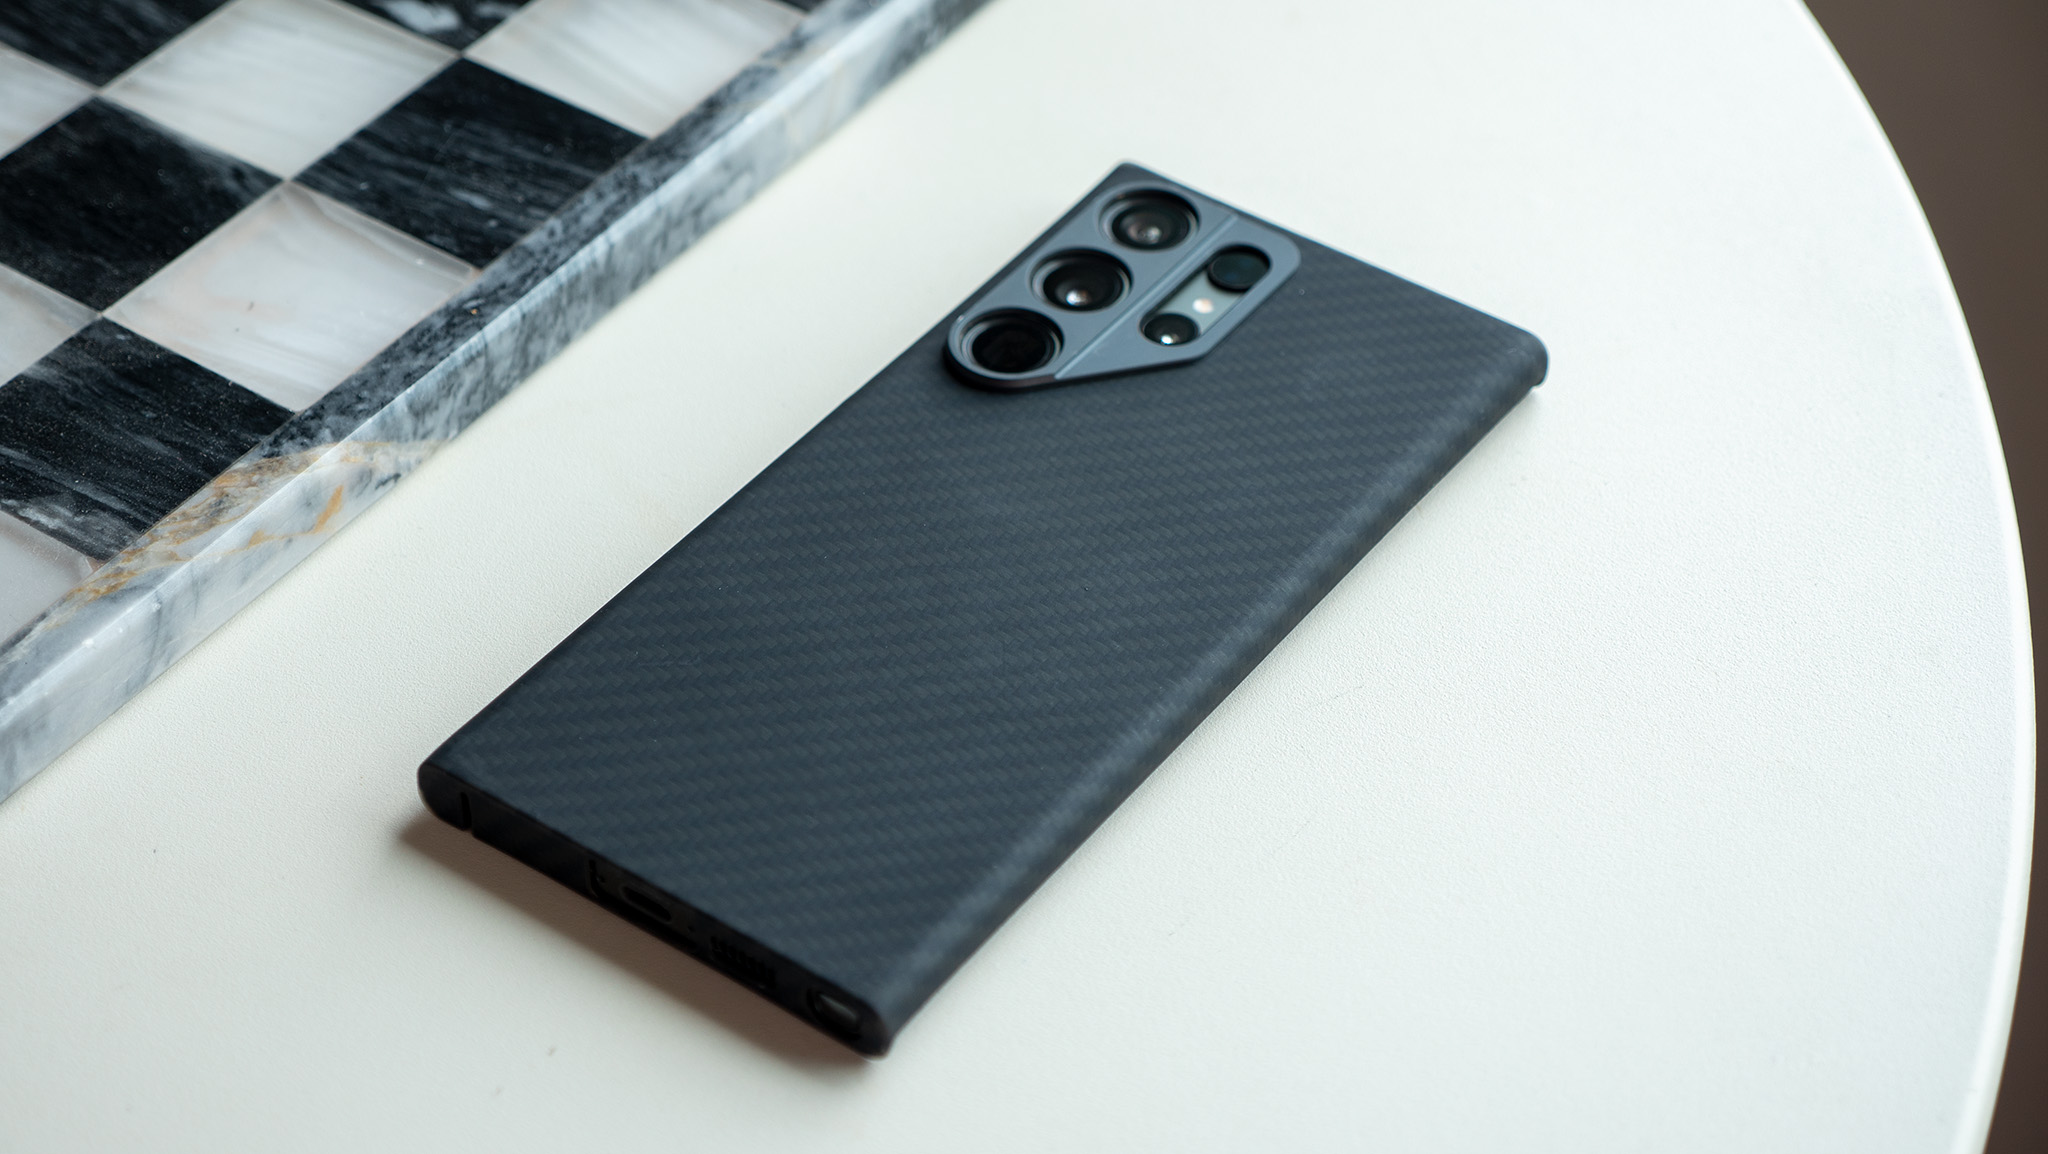 Thinborne Compatible with Nothing Phone 1 Case - [Extremely Thin Aramid  Fiber Cover], Minimalist Style with Carbon Fiber Textures